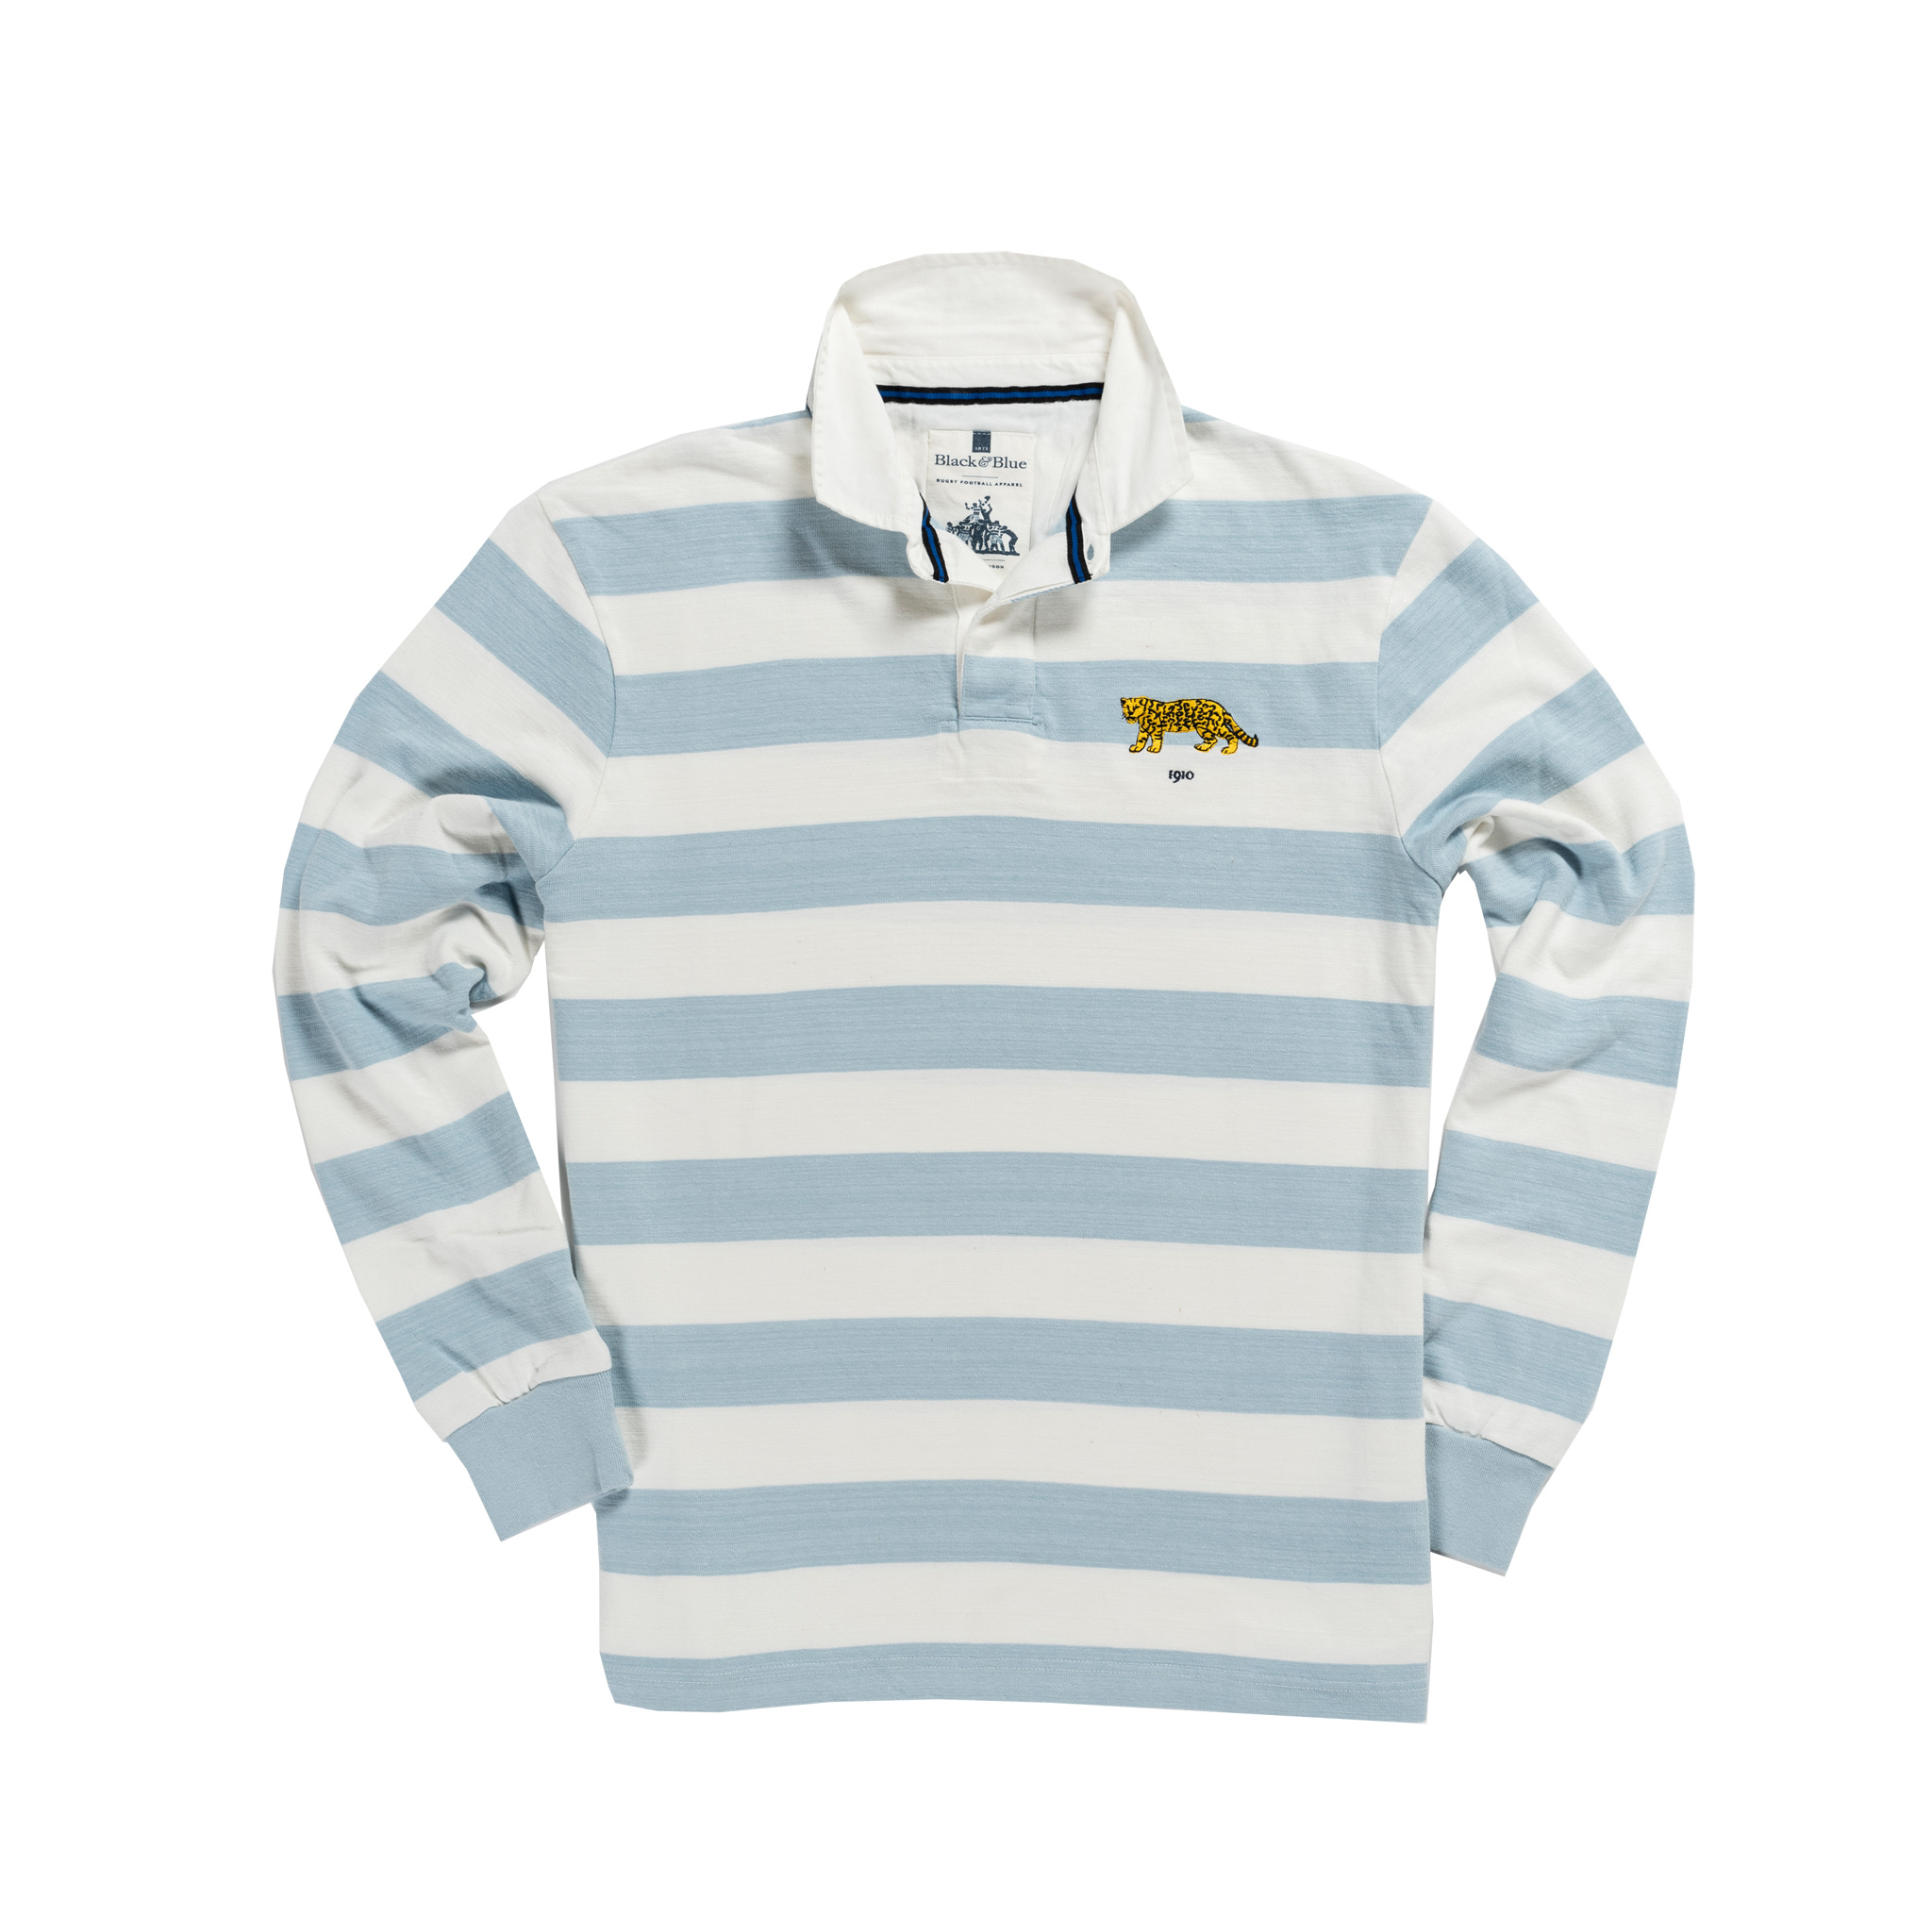 ARGENTINA 1910 RUGBY SHIRT 